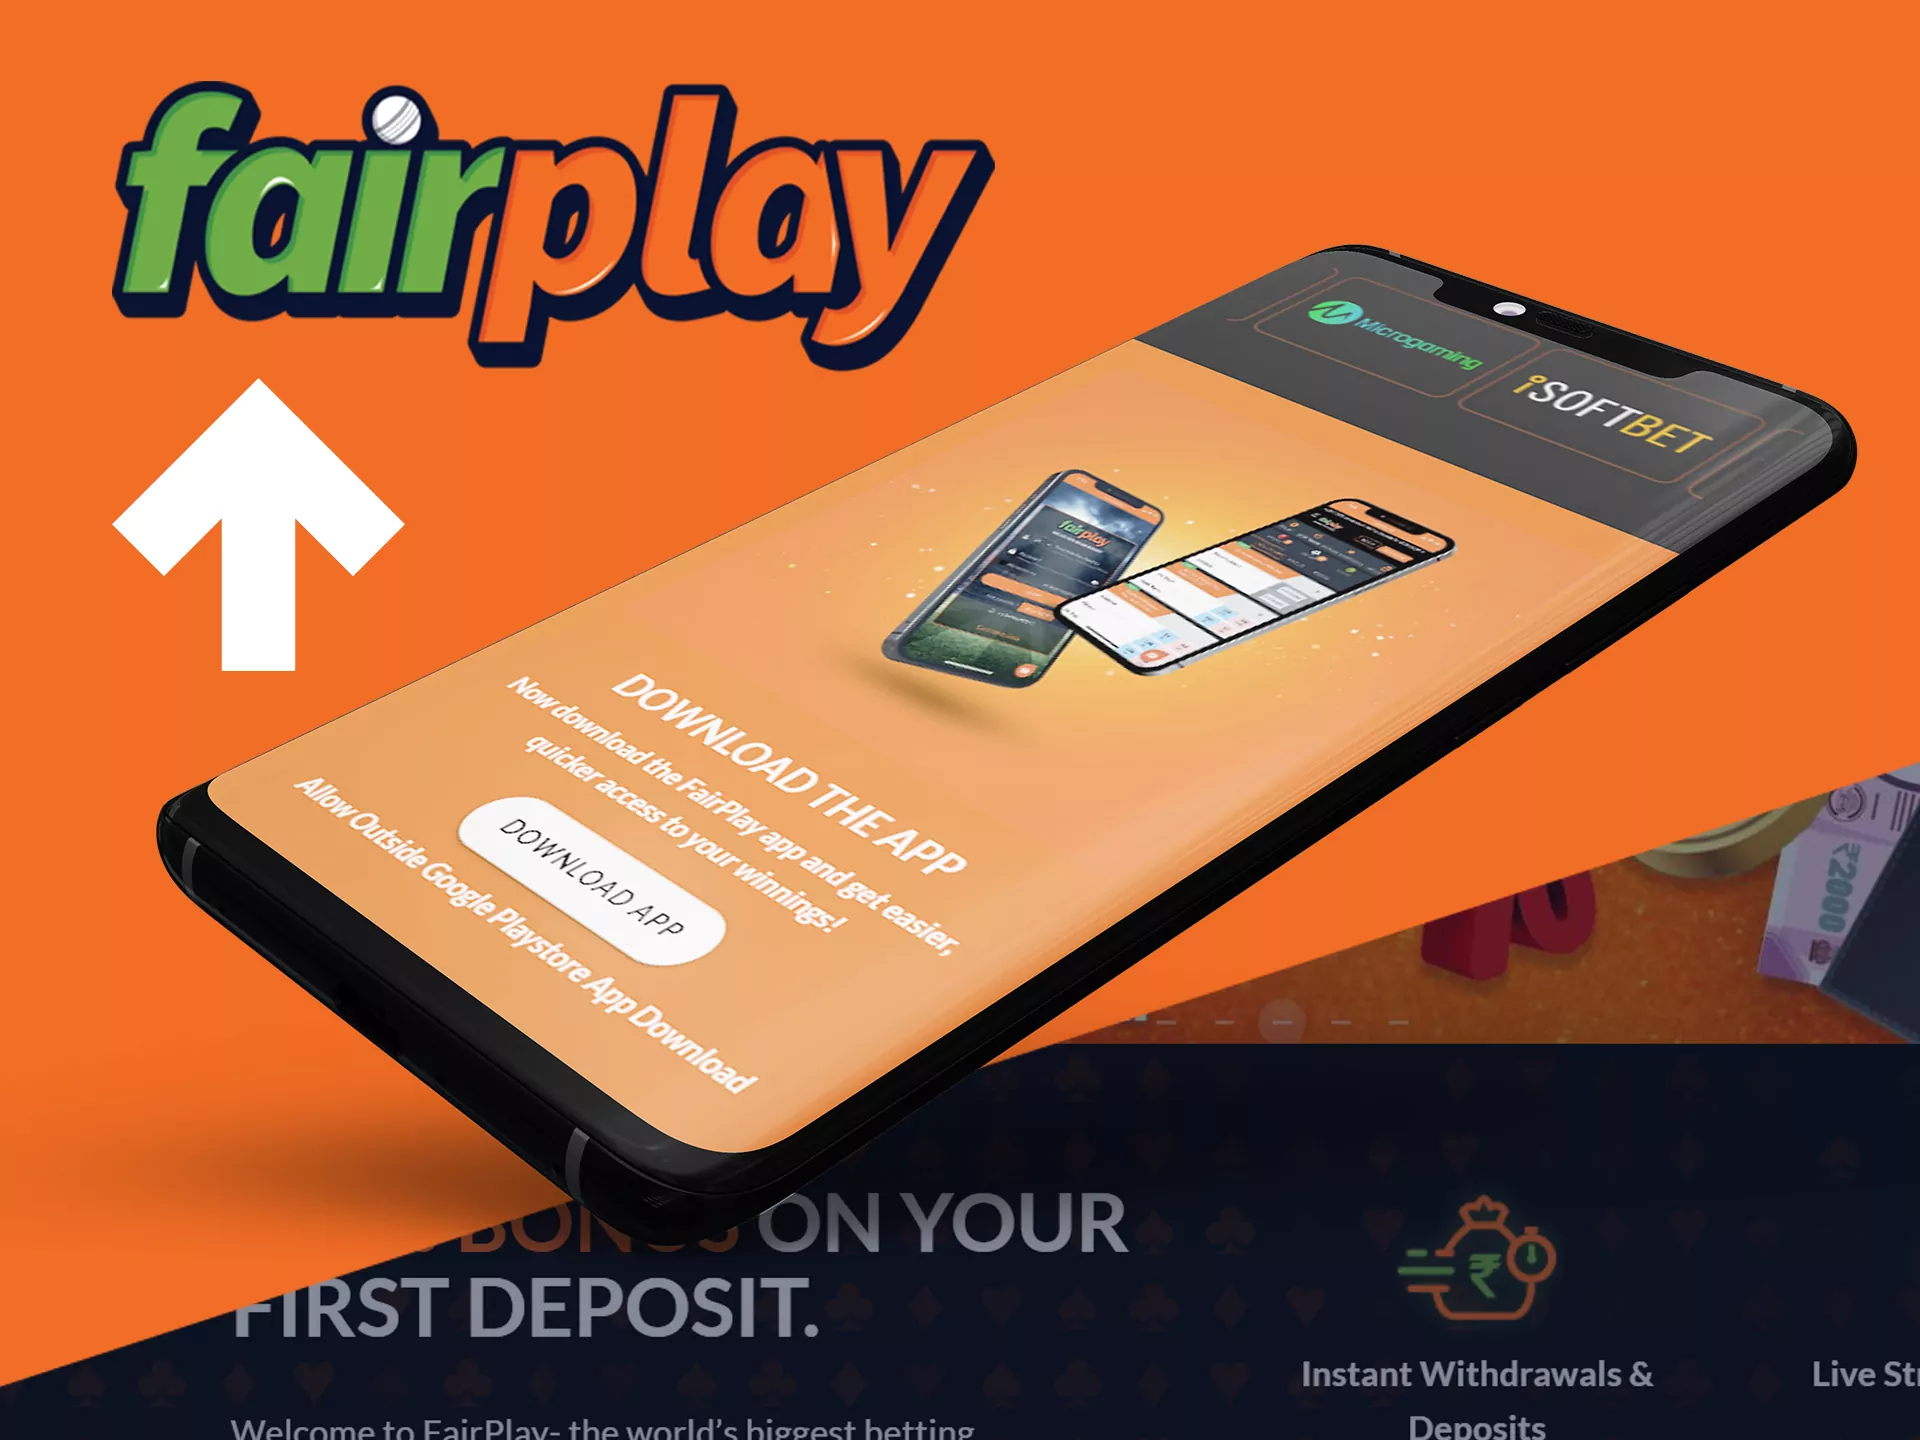 Keep the Fairplay app actual to bet with no problems.